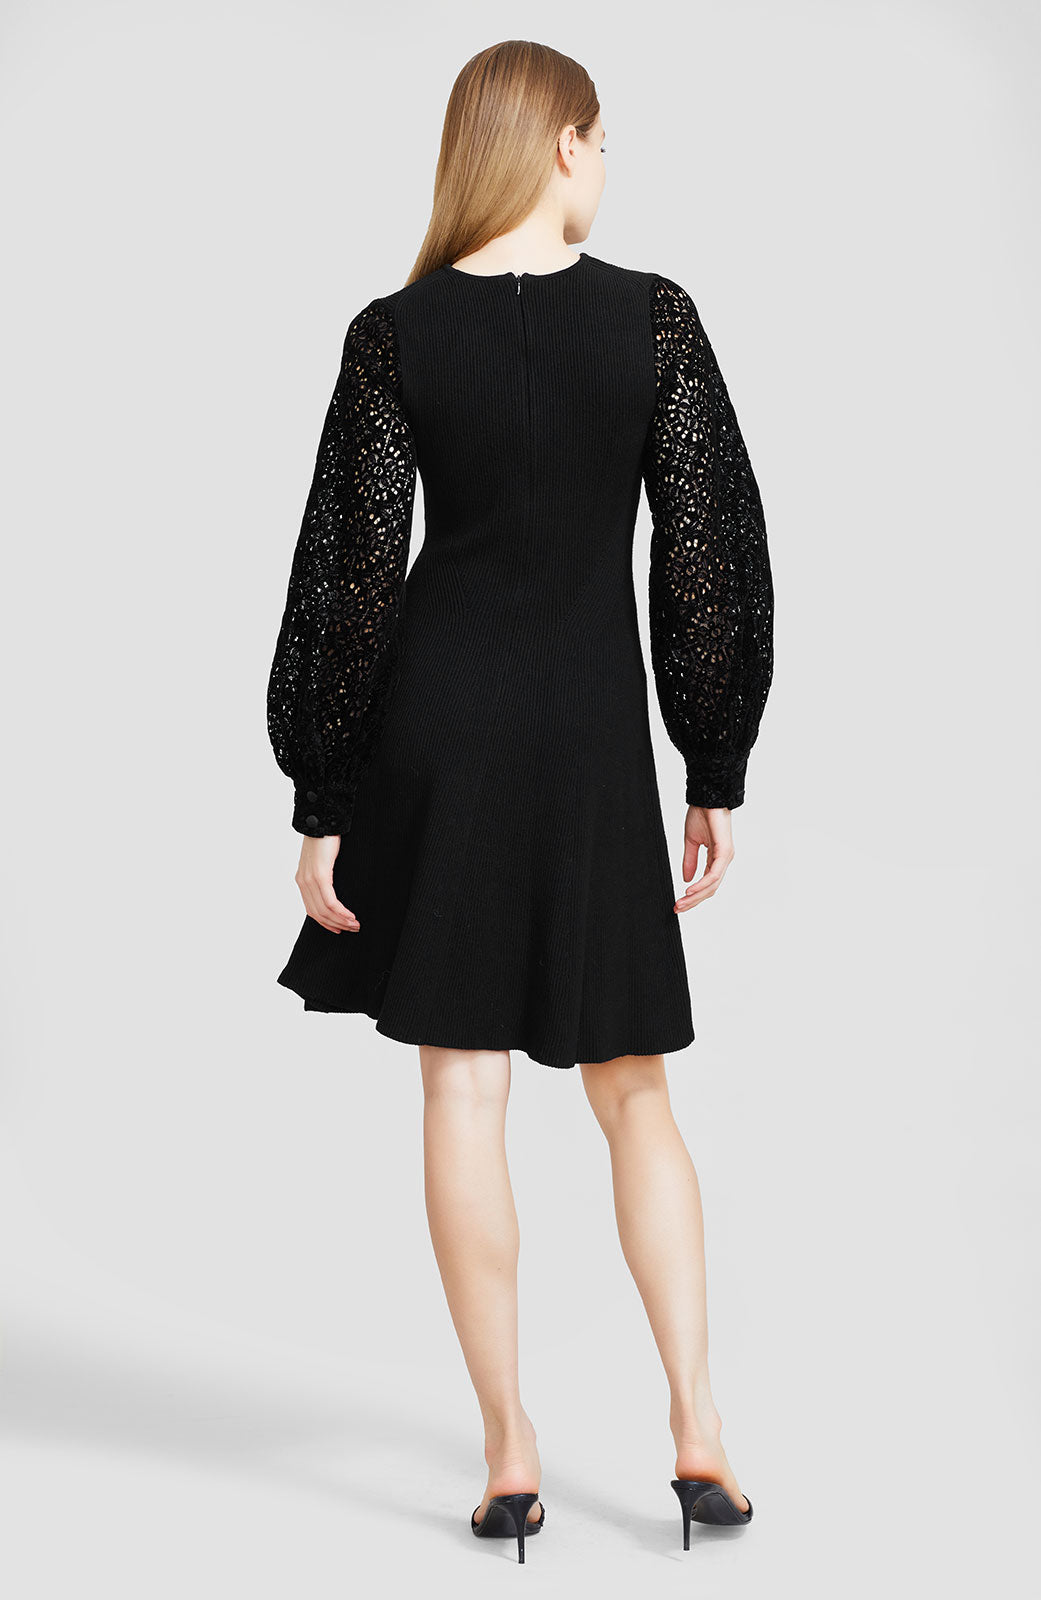 Rib Knit Fit and Flare Dress with Flocked Velvet Lace Sleeves